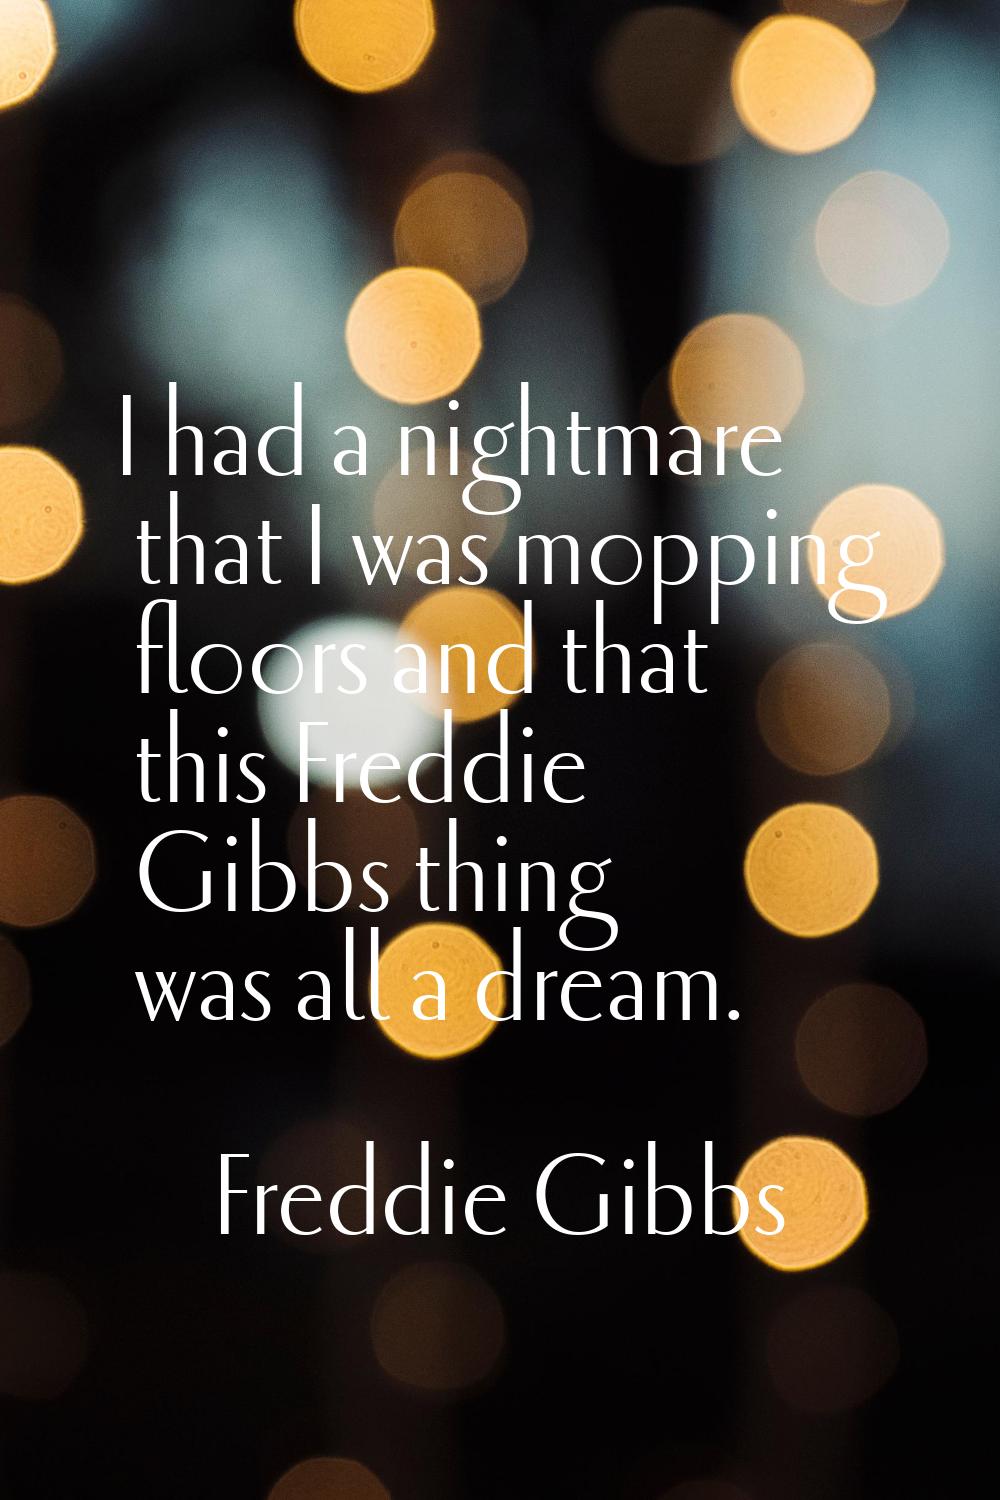 I had a nightmare that I was mopping floors and that this Freddie Gibbs thing was all a dream.